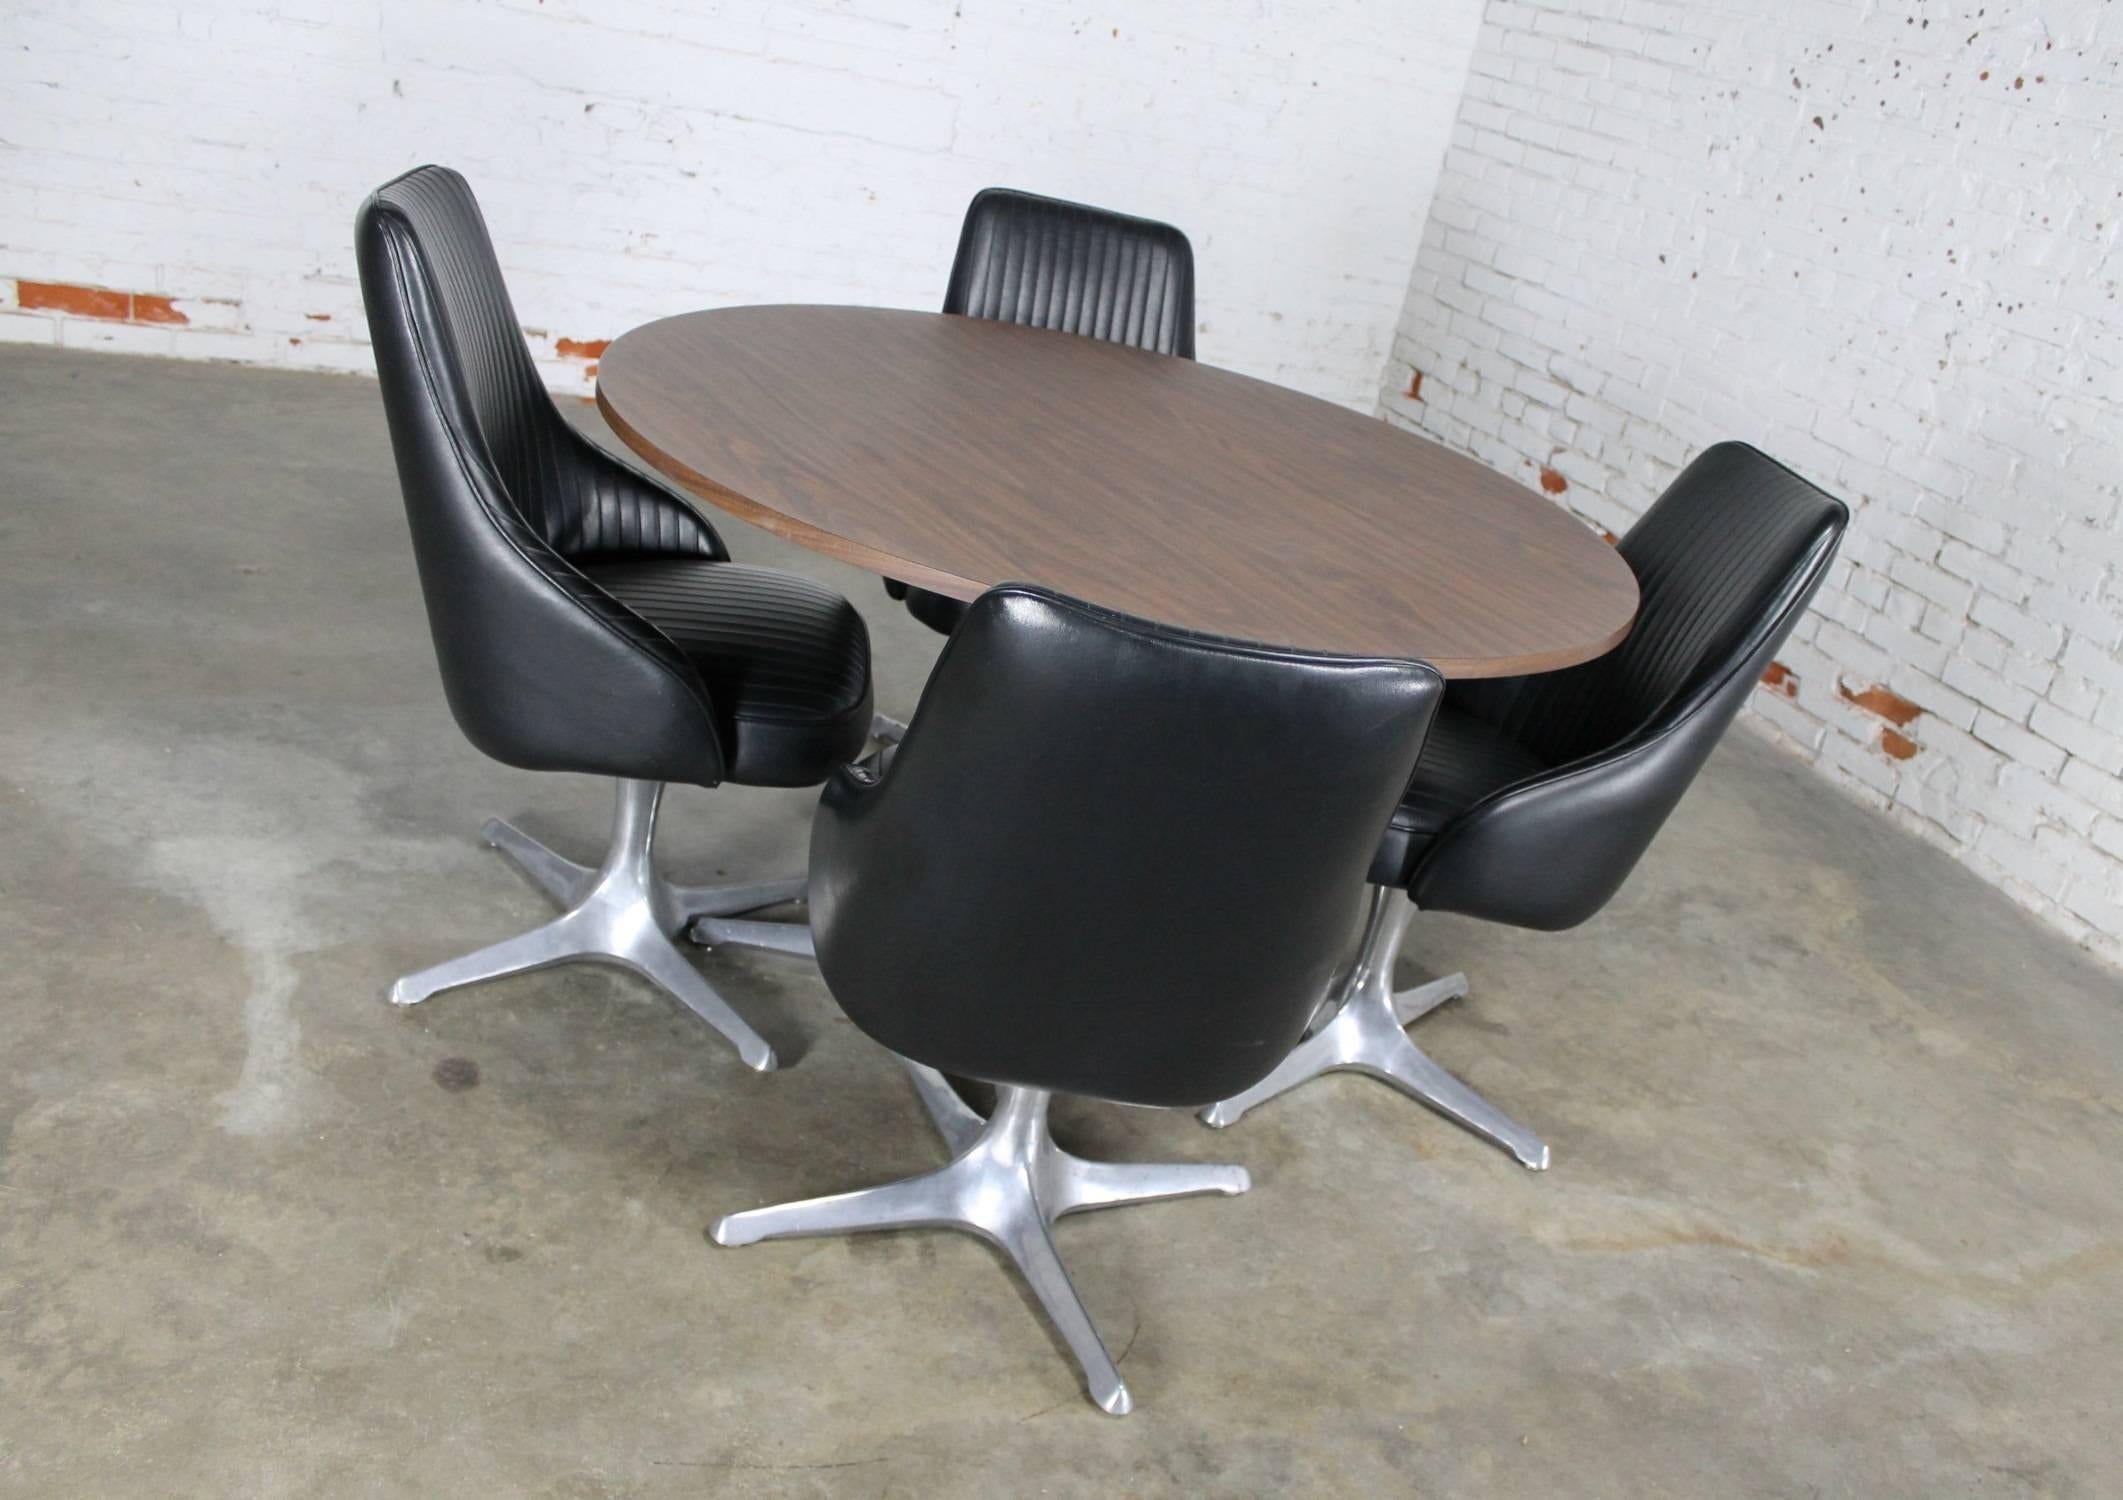 Awesome Mid-Century Modern round dinette table and four swivel chairs from the Decorables 1967 Selection by Chromcraft. This set is in wonderful vintage condition.

This incredible dinette set is from the Decorables 1967 Selection by Chromcraft.